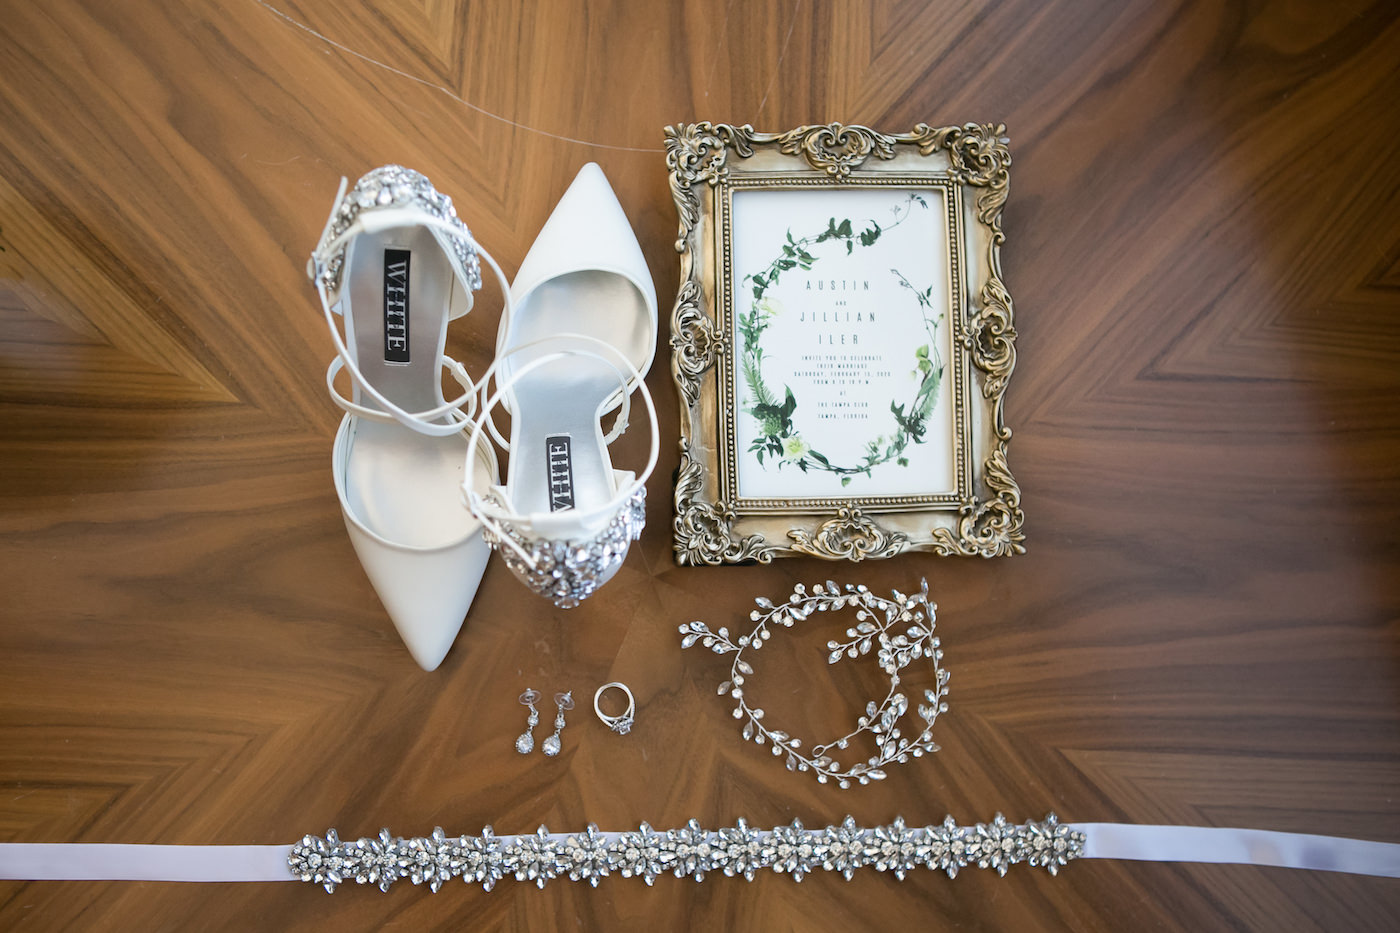 Elegant Wedding Accessories, White Pointed Toe Strappy and Rhinestone Heel Bridal Wedding Shoes, Rhinestone Garter, Bride's Jewelry and Romantic Hair Piece, Antique Gold Frame with Greenery Save the Date | Tampa Wedding Photographer Carrie Wildes Photography